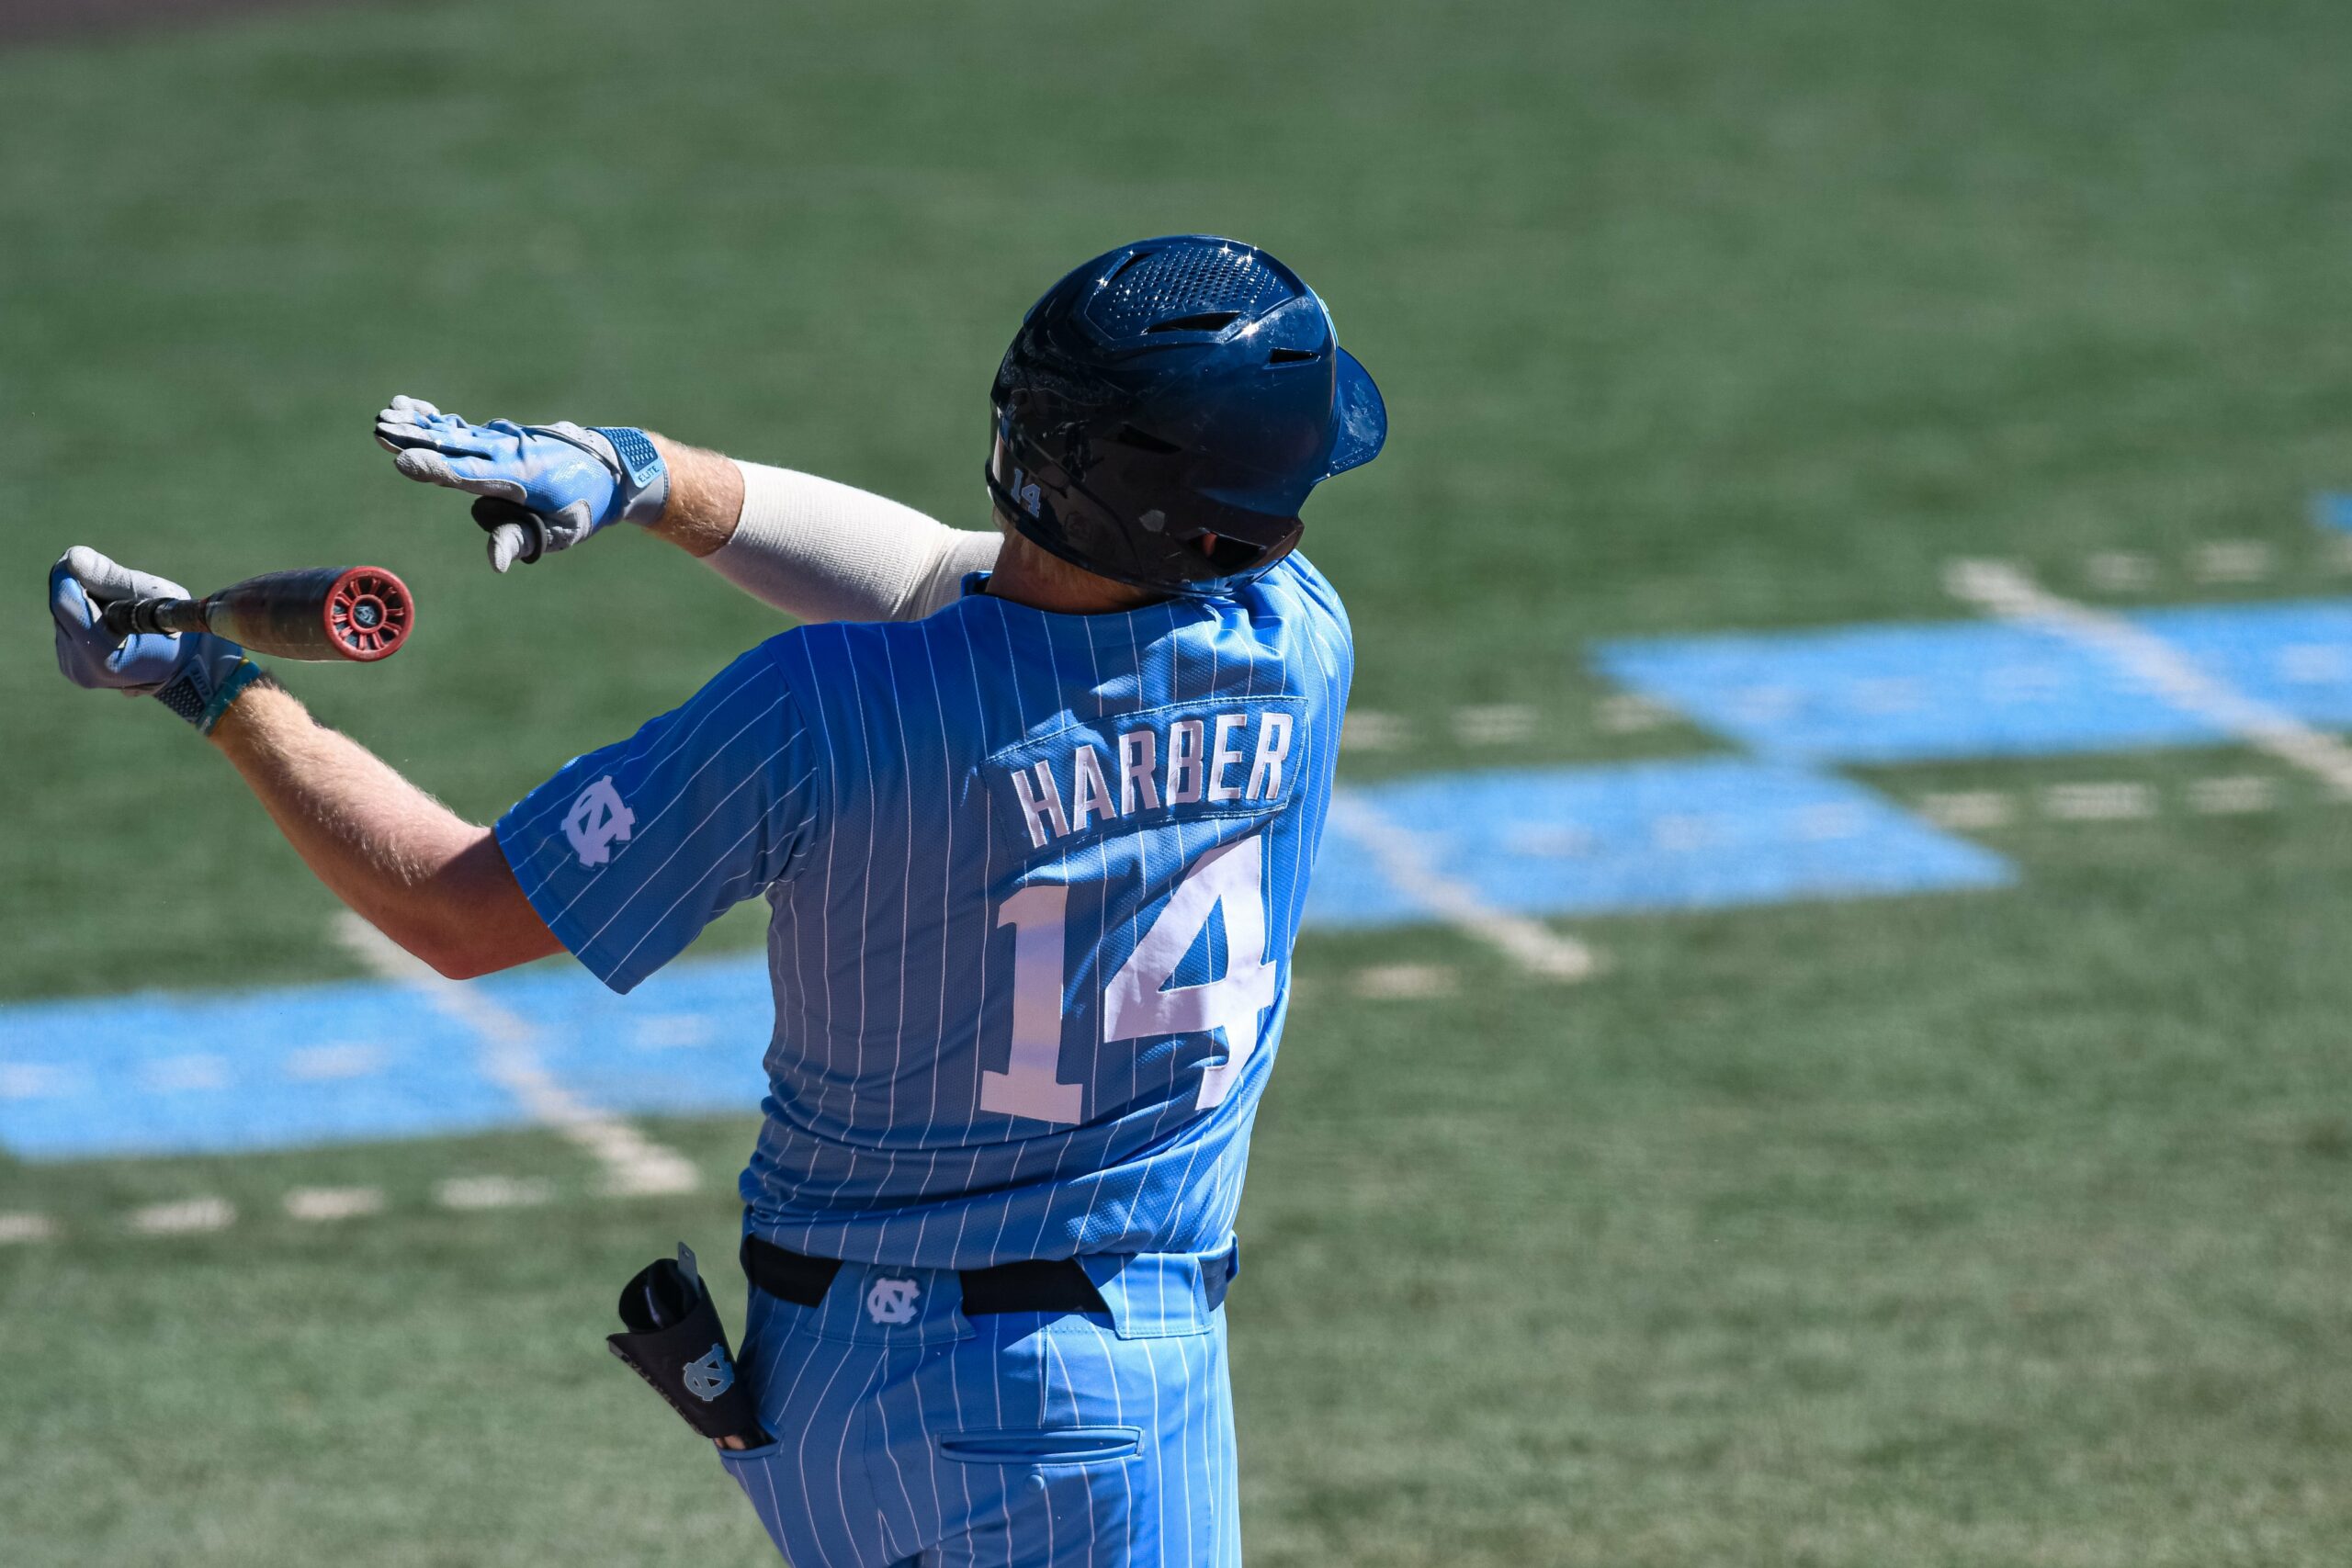 UNC Baseball matches Hokies pitching, lacks hitting in first ACC home loss in 371 days